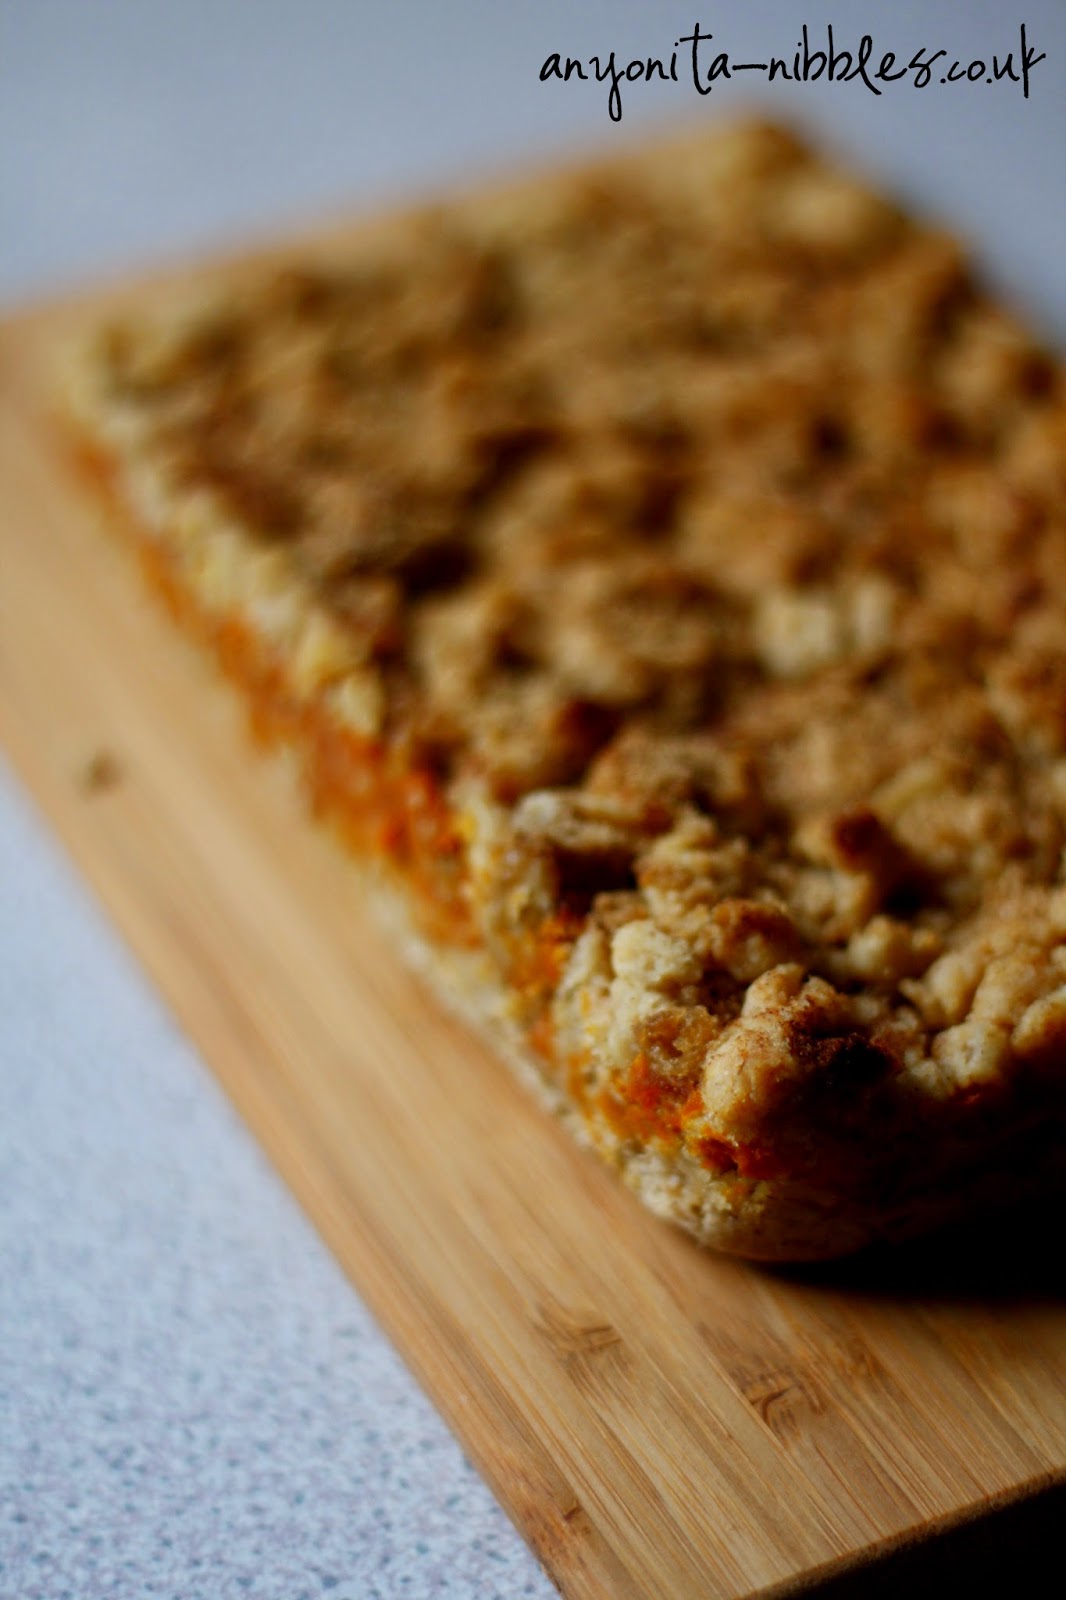 Gluten free pumpkin oat bars ready to be sliced and served from Anyonita-nibbles.co.uk